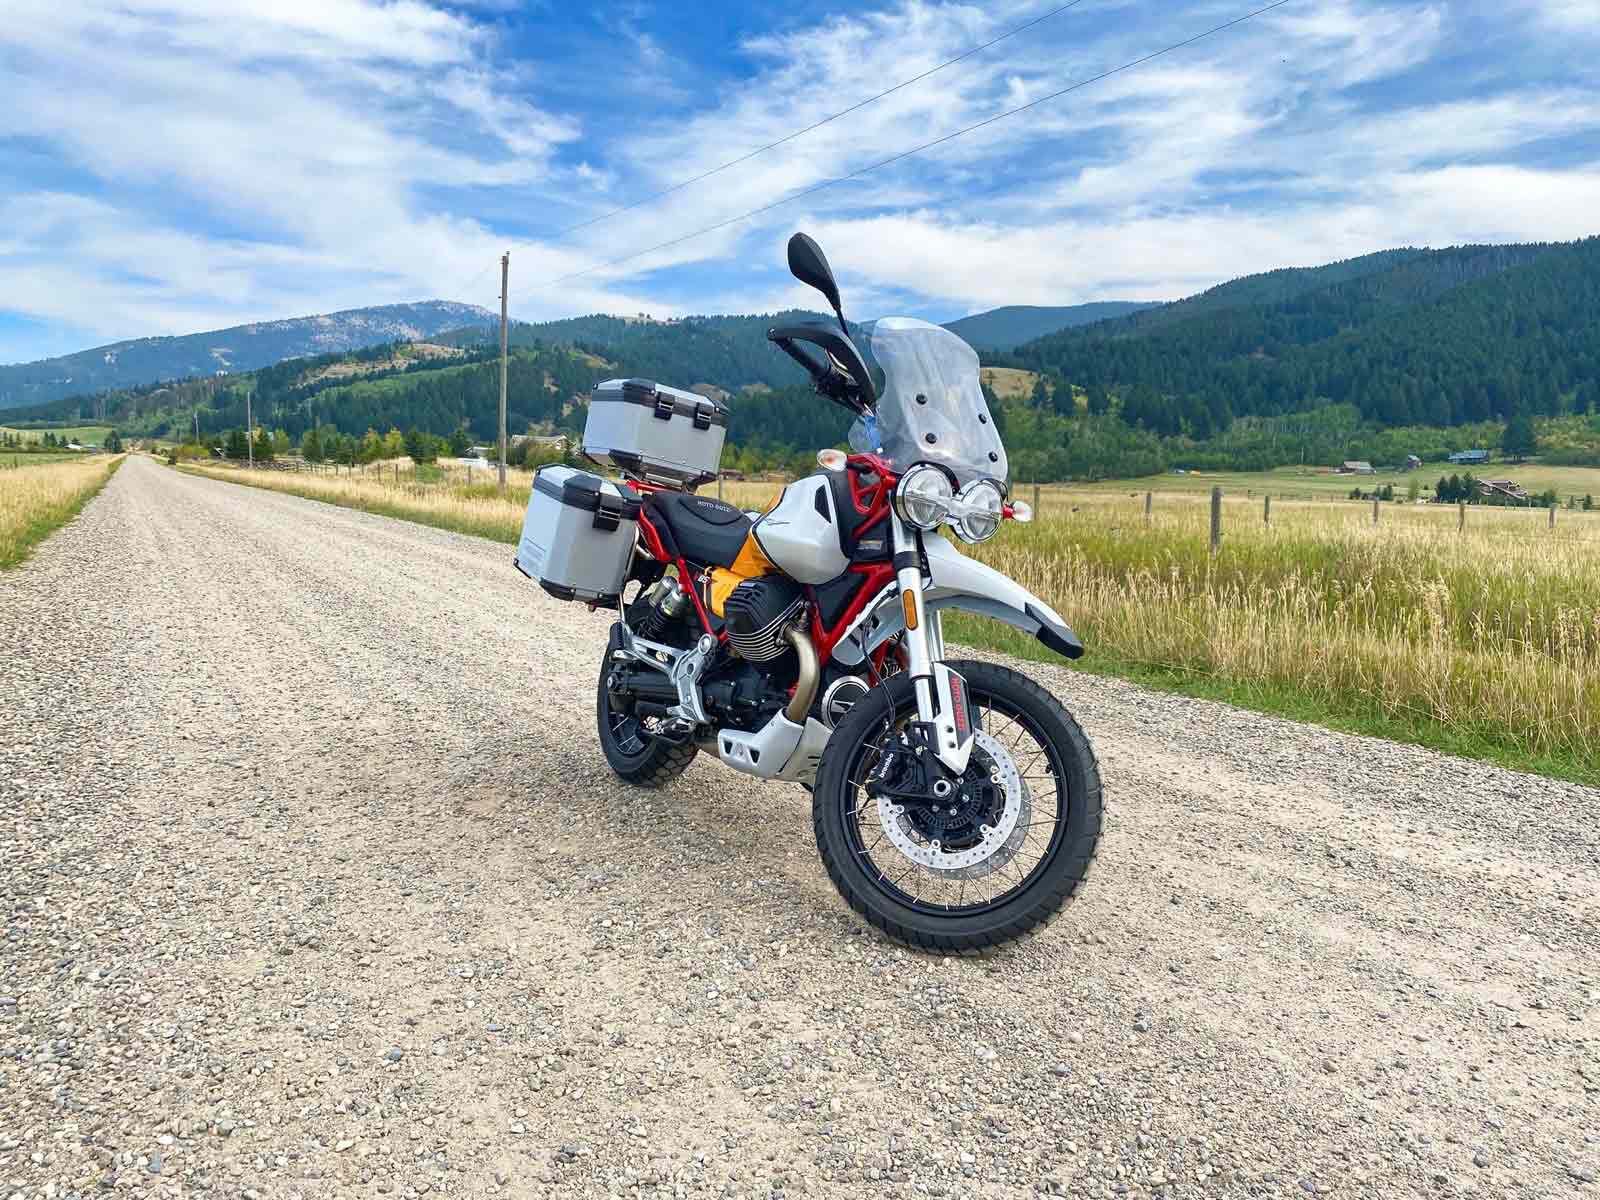 The Moto Guzzi Experience returns for the second-straight year, providing tours through some of the USA’s most desirable riding country, including Yellowstone National Park, the Ozarks, and California.